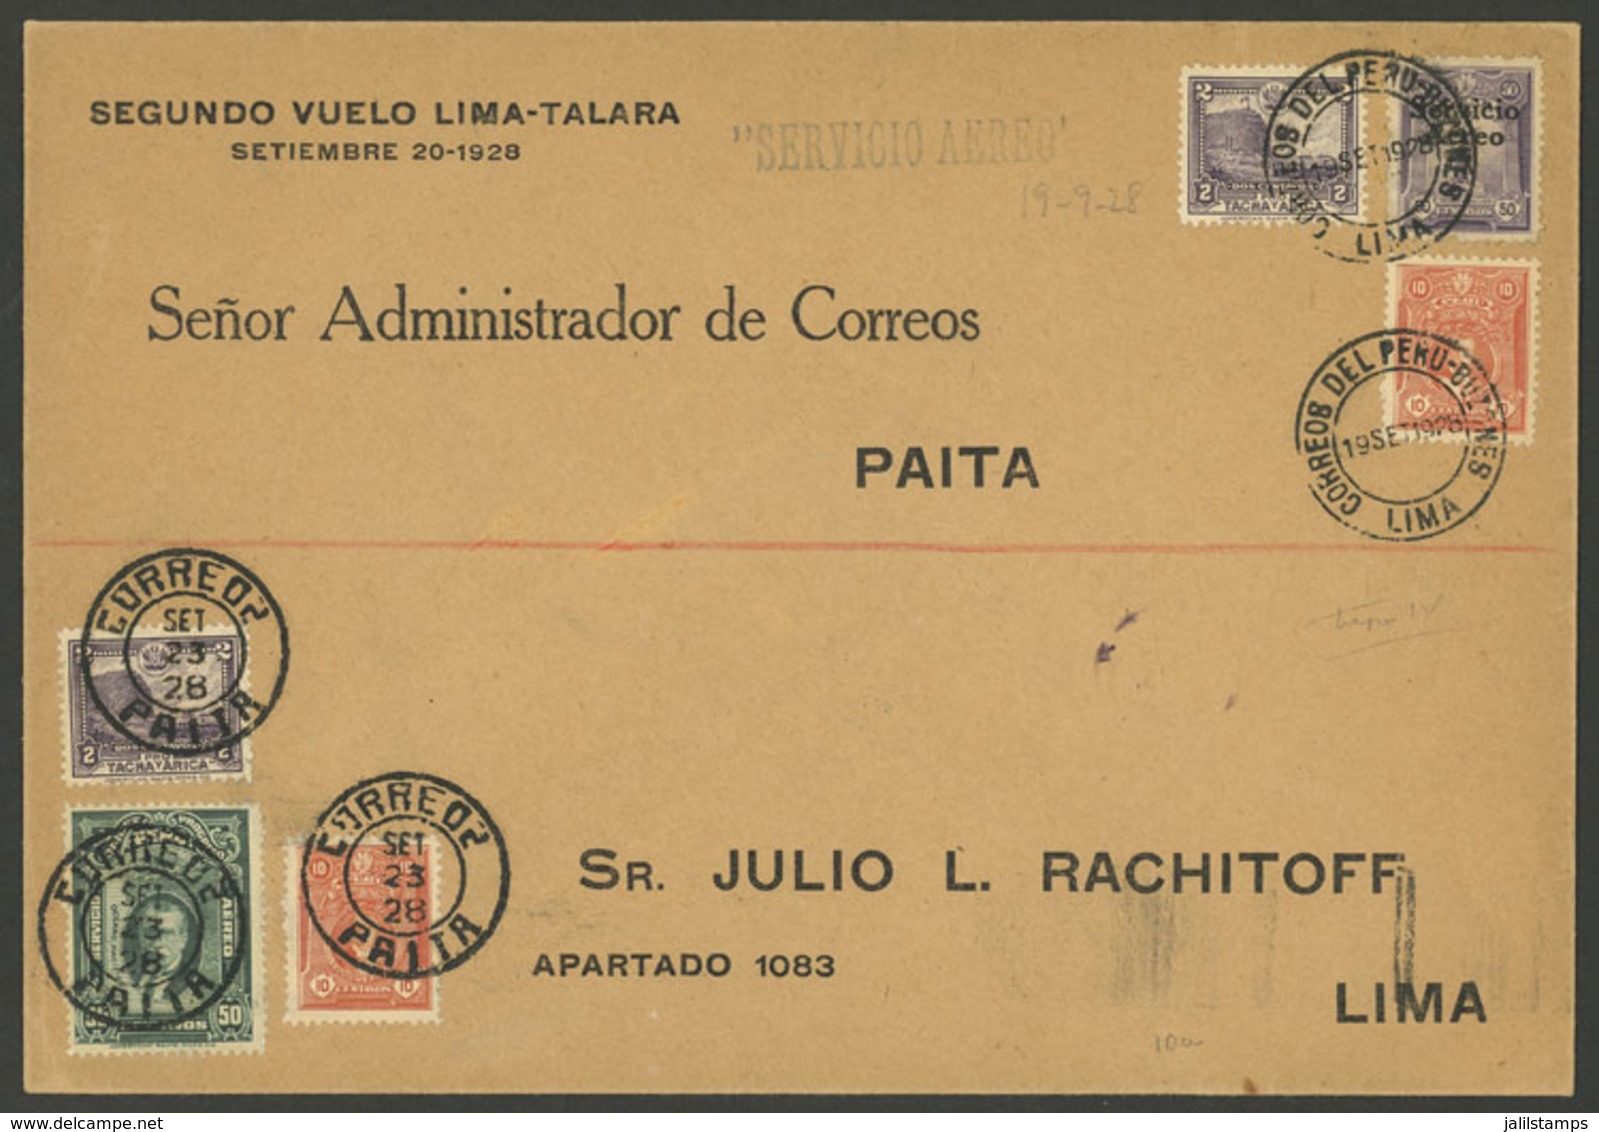 PERU: 19/SE/1928 Second Flight Lima - Paita - Lima, Cover With Double Postage To Pay The Rating Of Both Flights, Using S - Peru